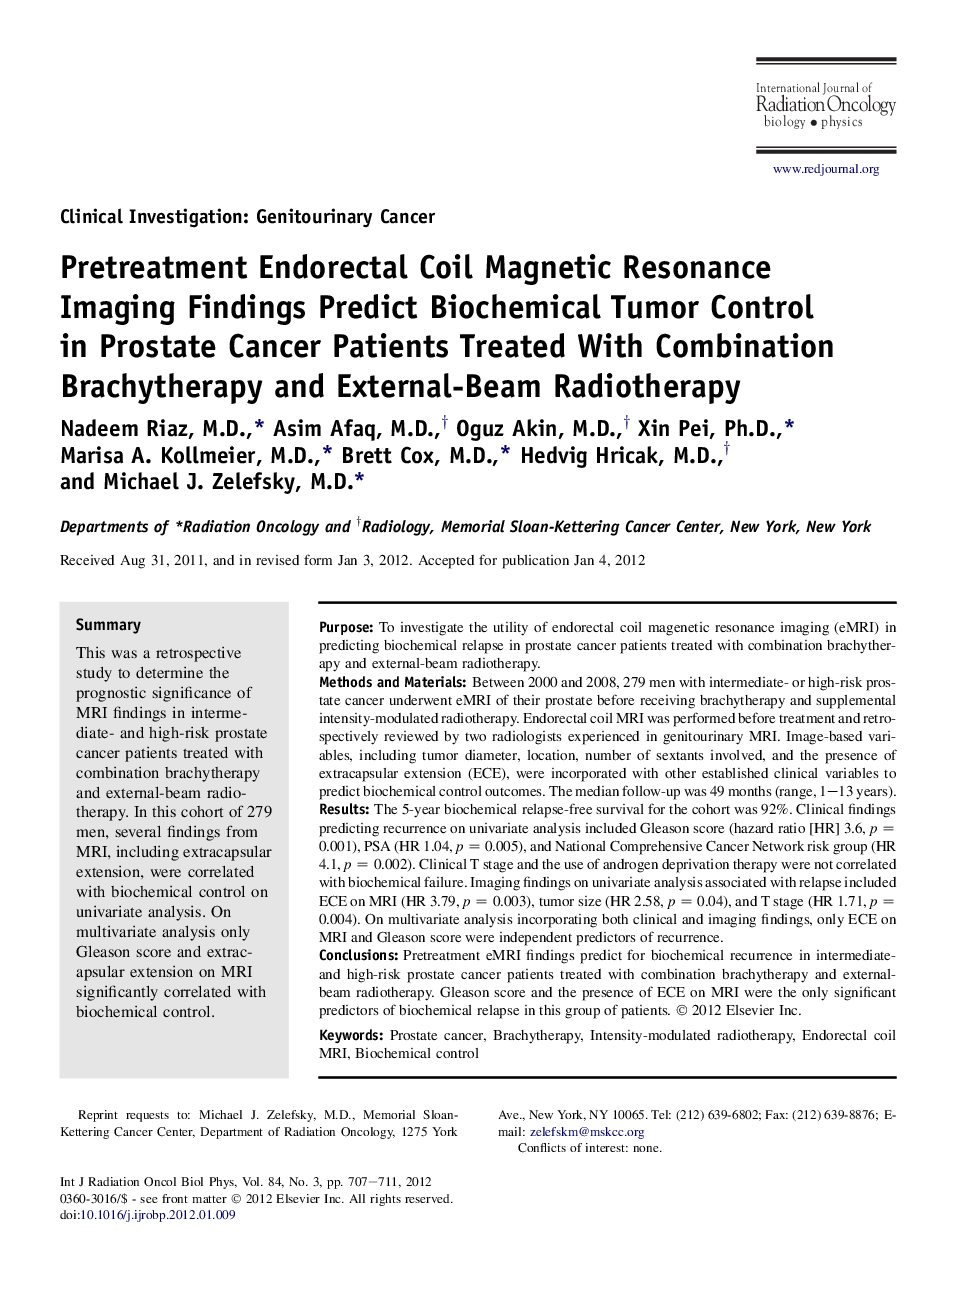 Pretreatment Endorectal Coil Magnetic Resonance Imaging Findings Predict Biochemical Tumor Control in Prostate Cancer Patients Treated With Combination Brachytherapy and External-Beam Radiotherapy